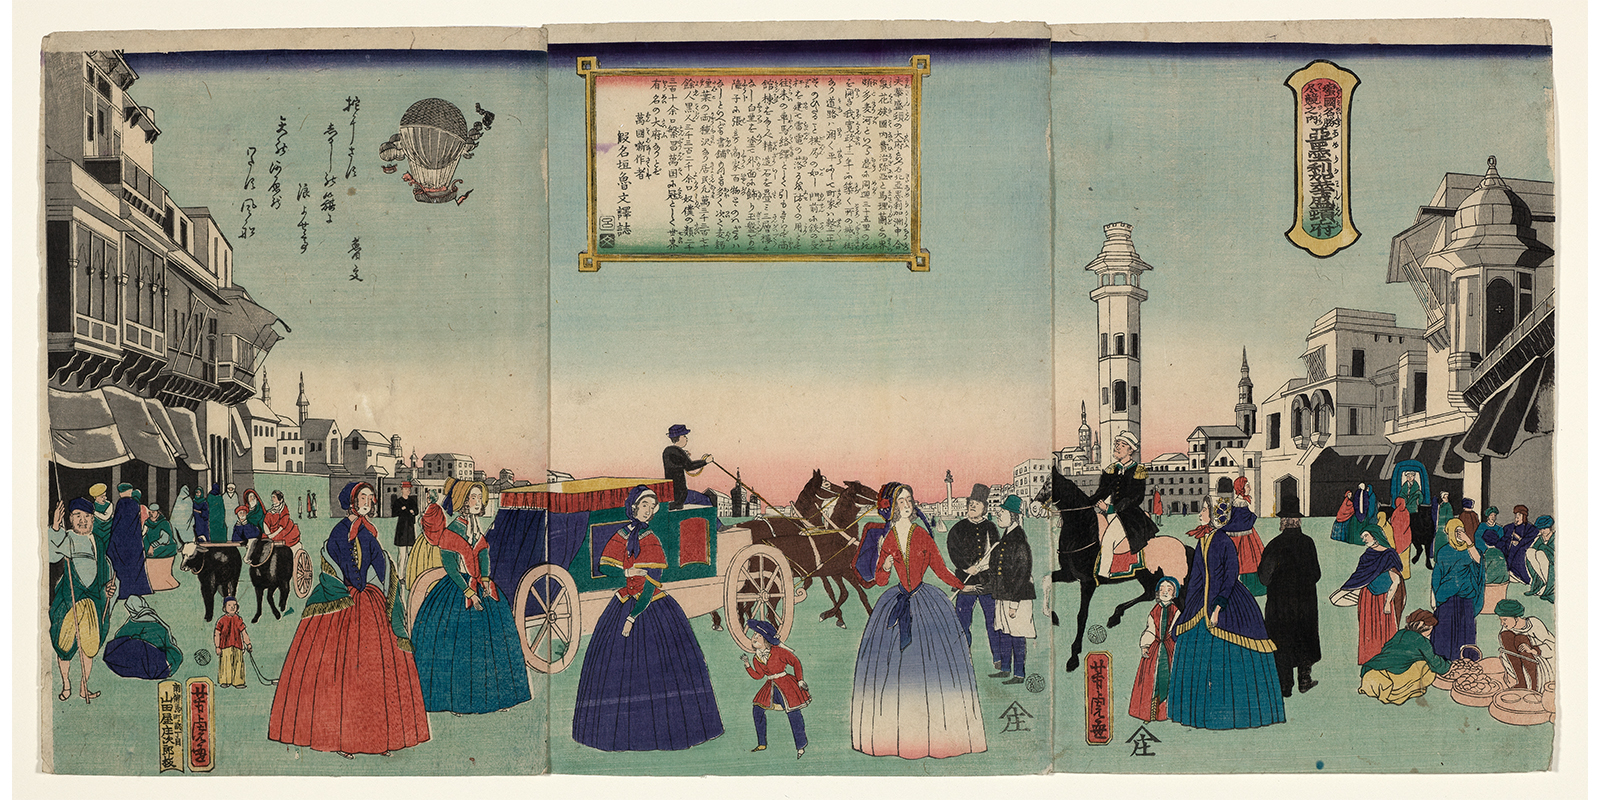 Three panel multi-color woodblock print of people dressed in 1800's clothes walking in the middle of the street with building on either side. Chinese lettering can be found in various spots of the print.